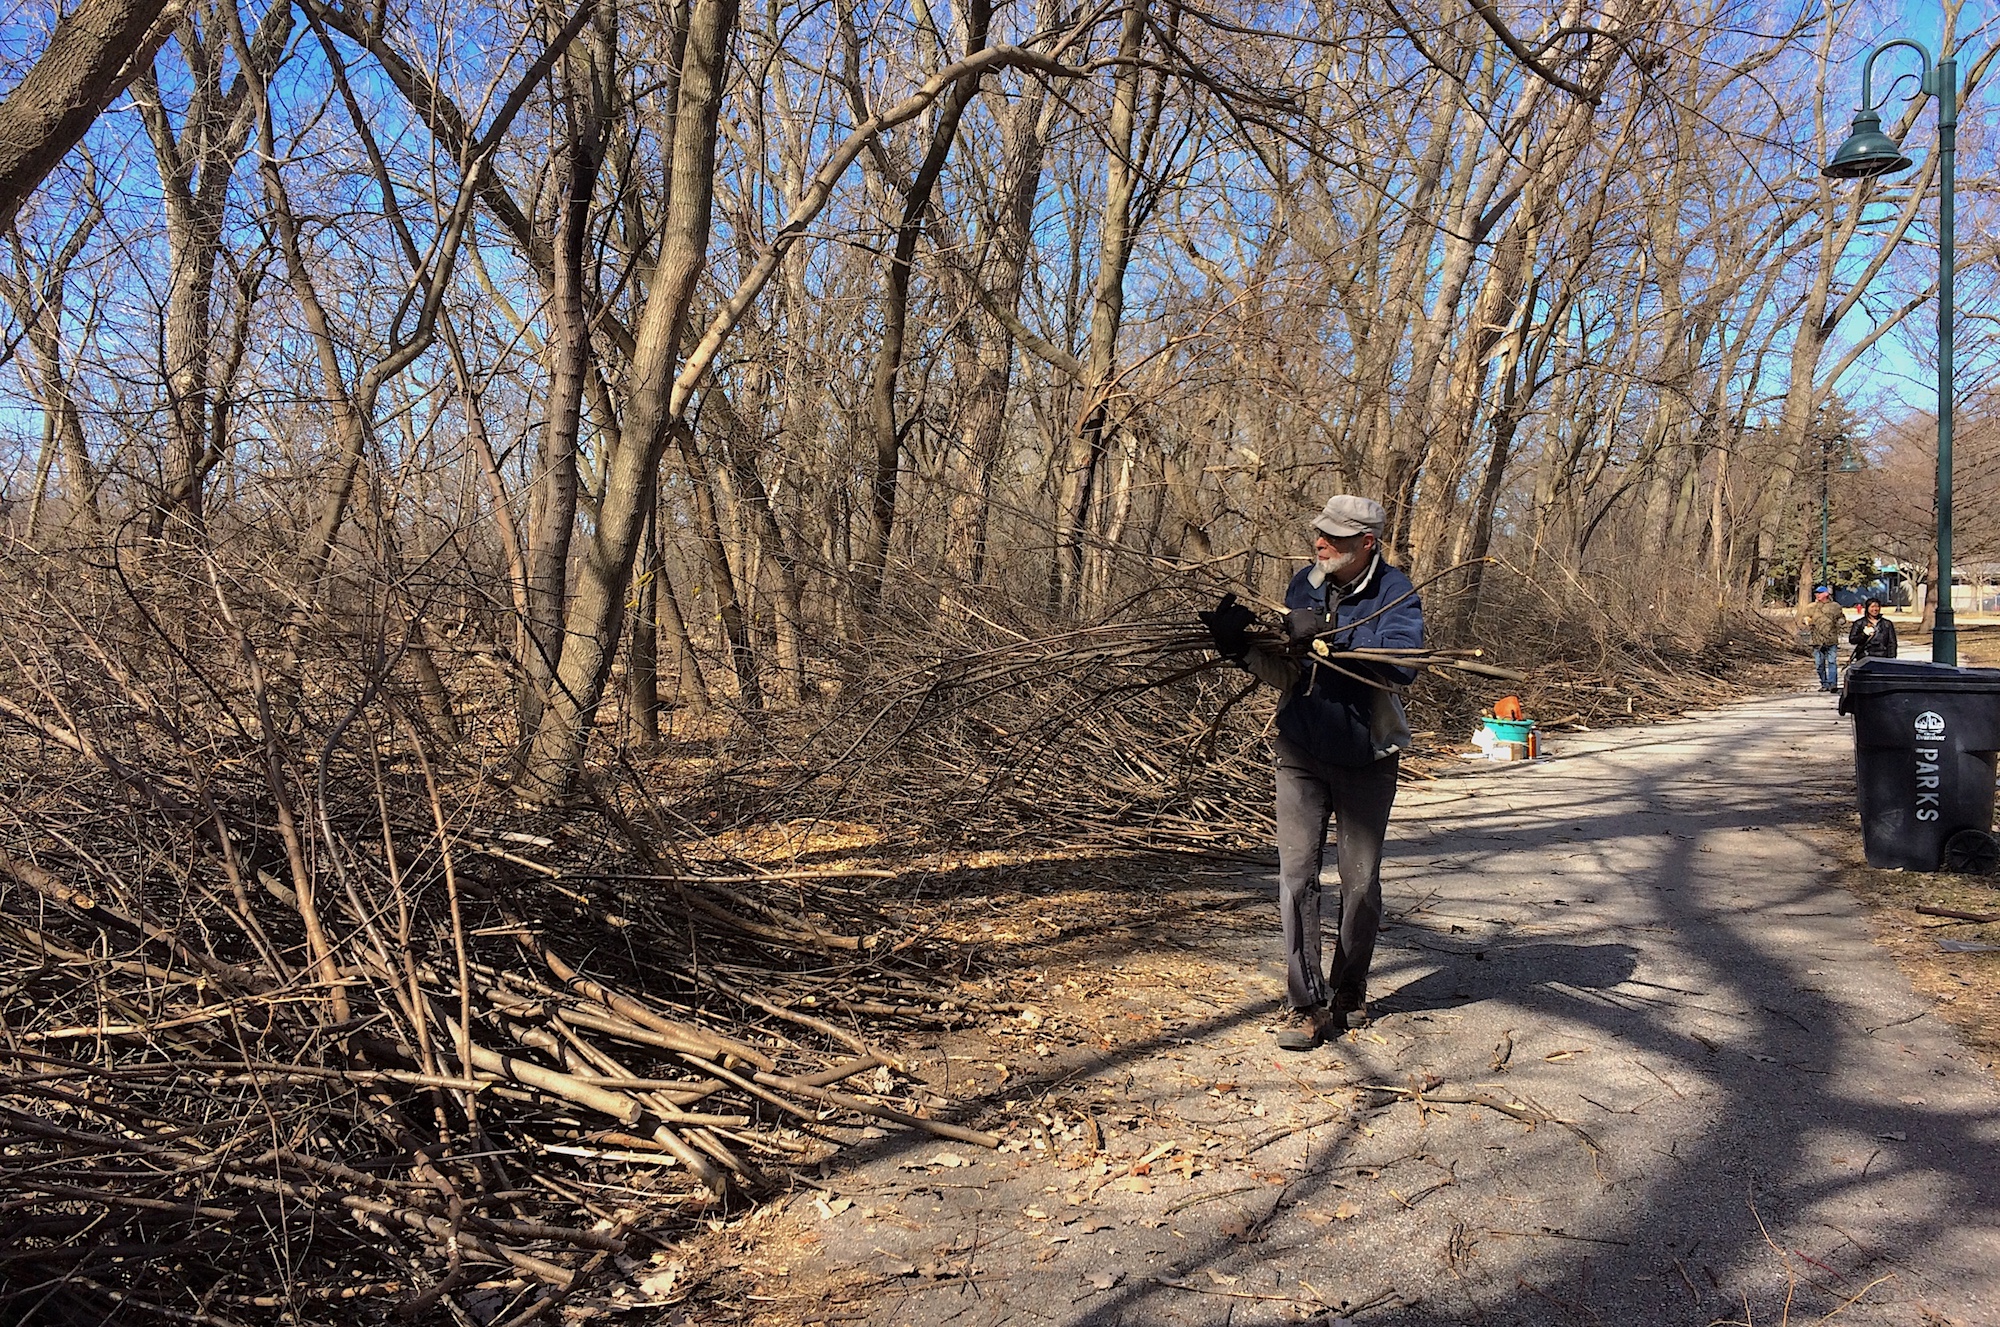 Piling up the buckthorn at another Harbert Park workday